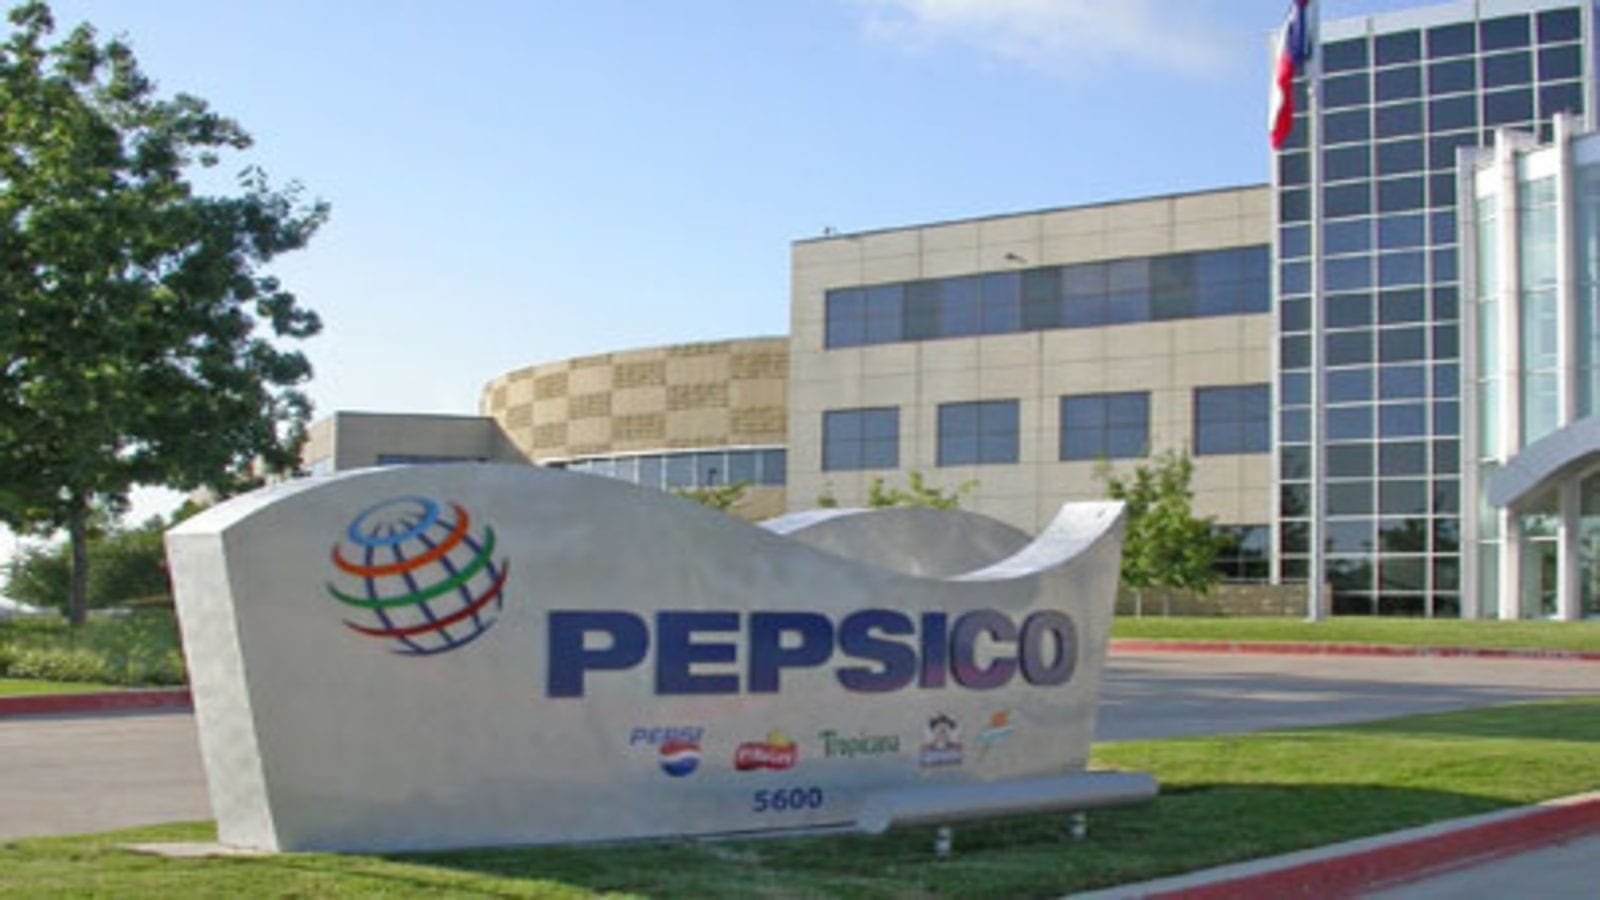 PepsiCo revenues jump 20.5% in Q2 buoyed by recovering out-of-home consumption